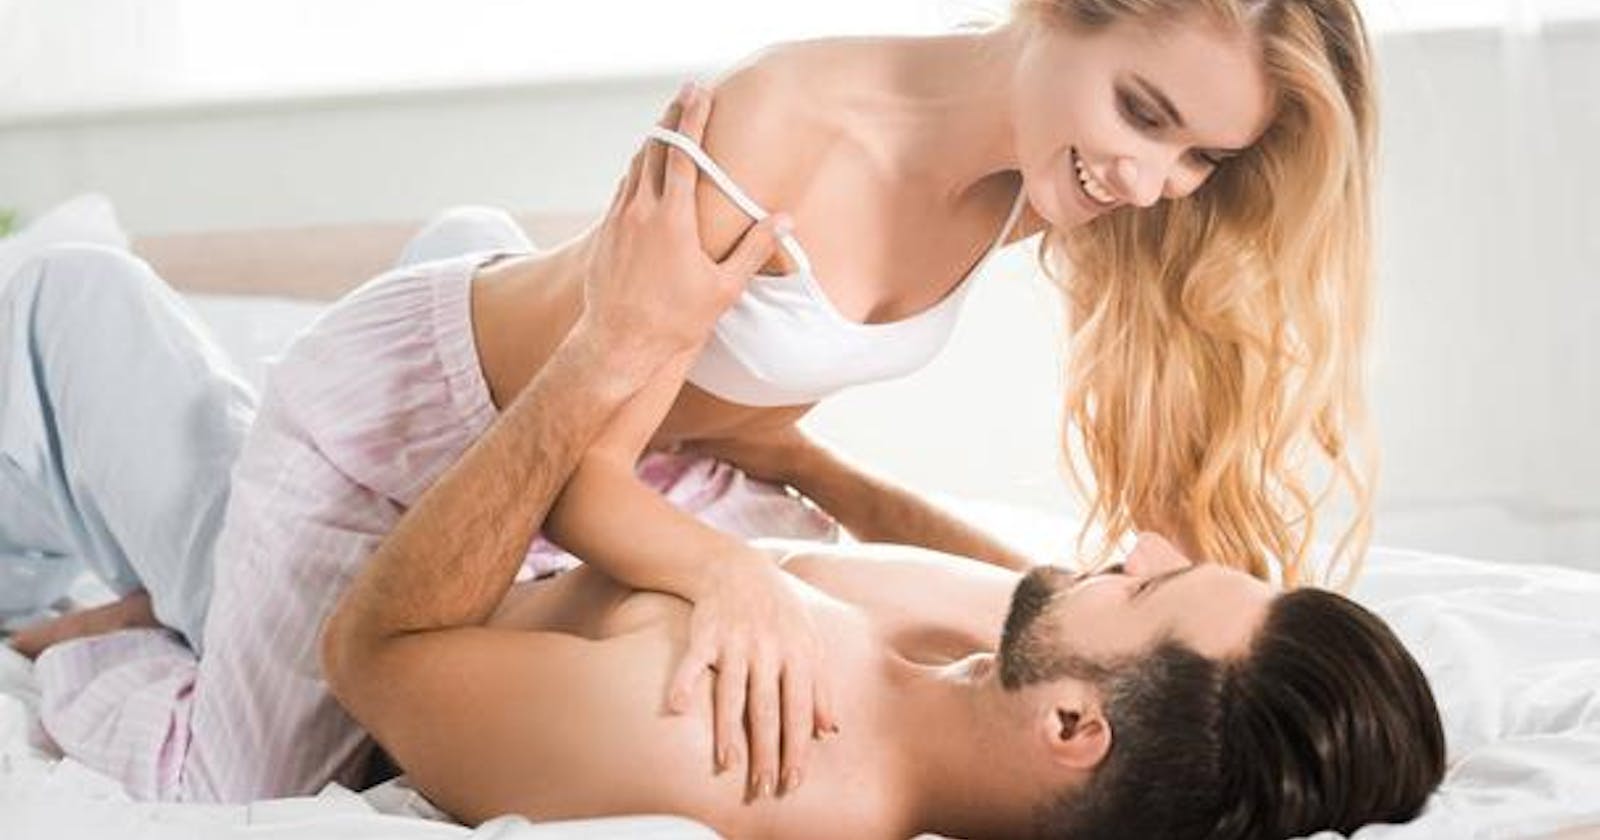 Boostaro Male Enhancement Reviews – Does This Product Really Work?